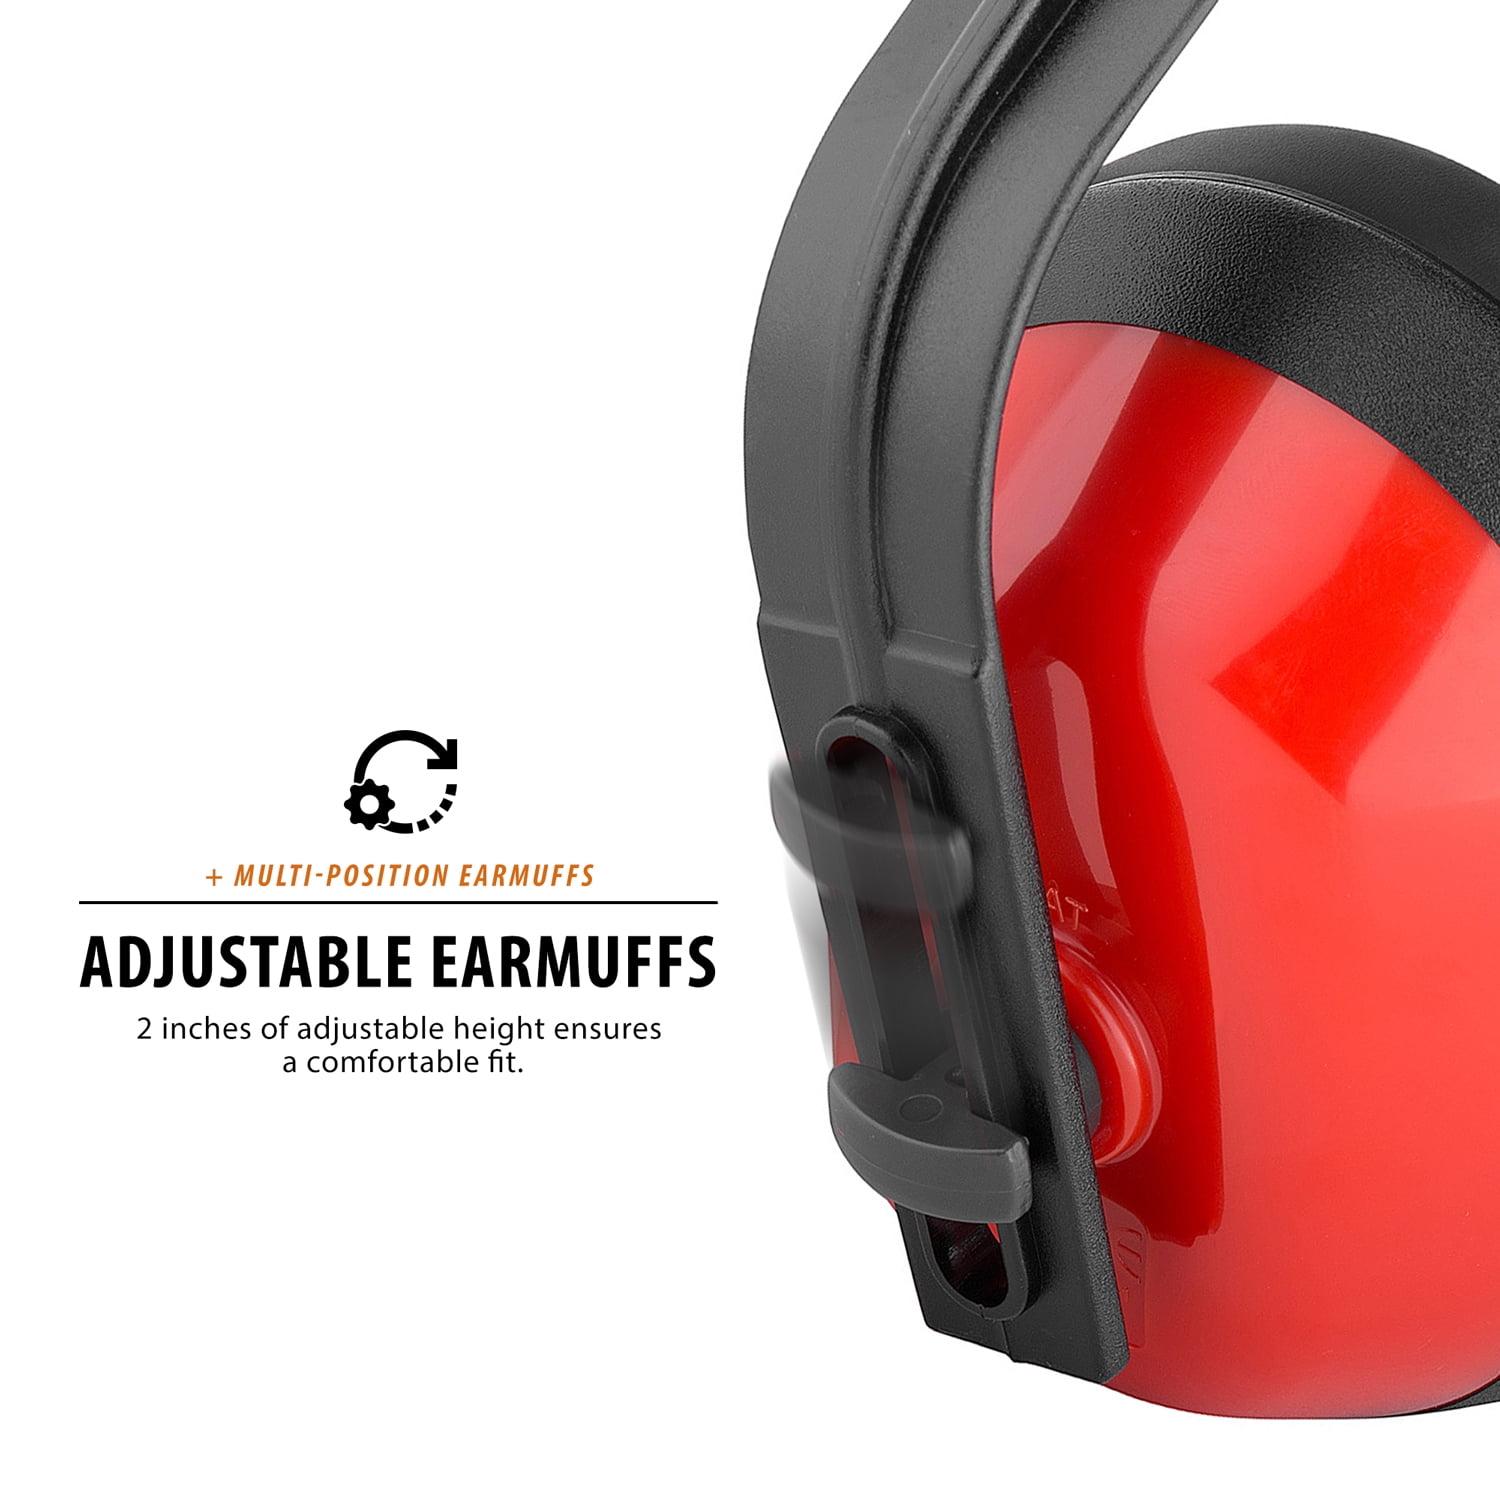 TR Industrial Safety Ear Muff, ANSI S3.19 Approved, 10-Pack